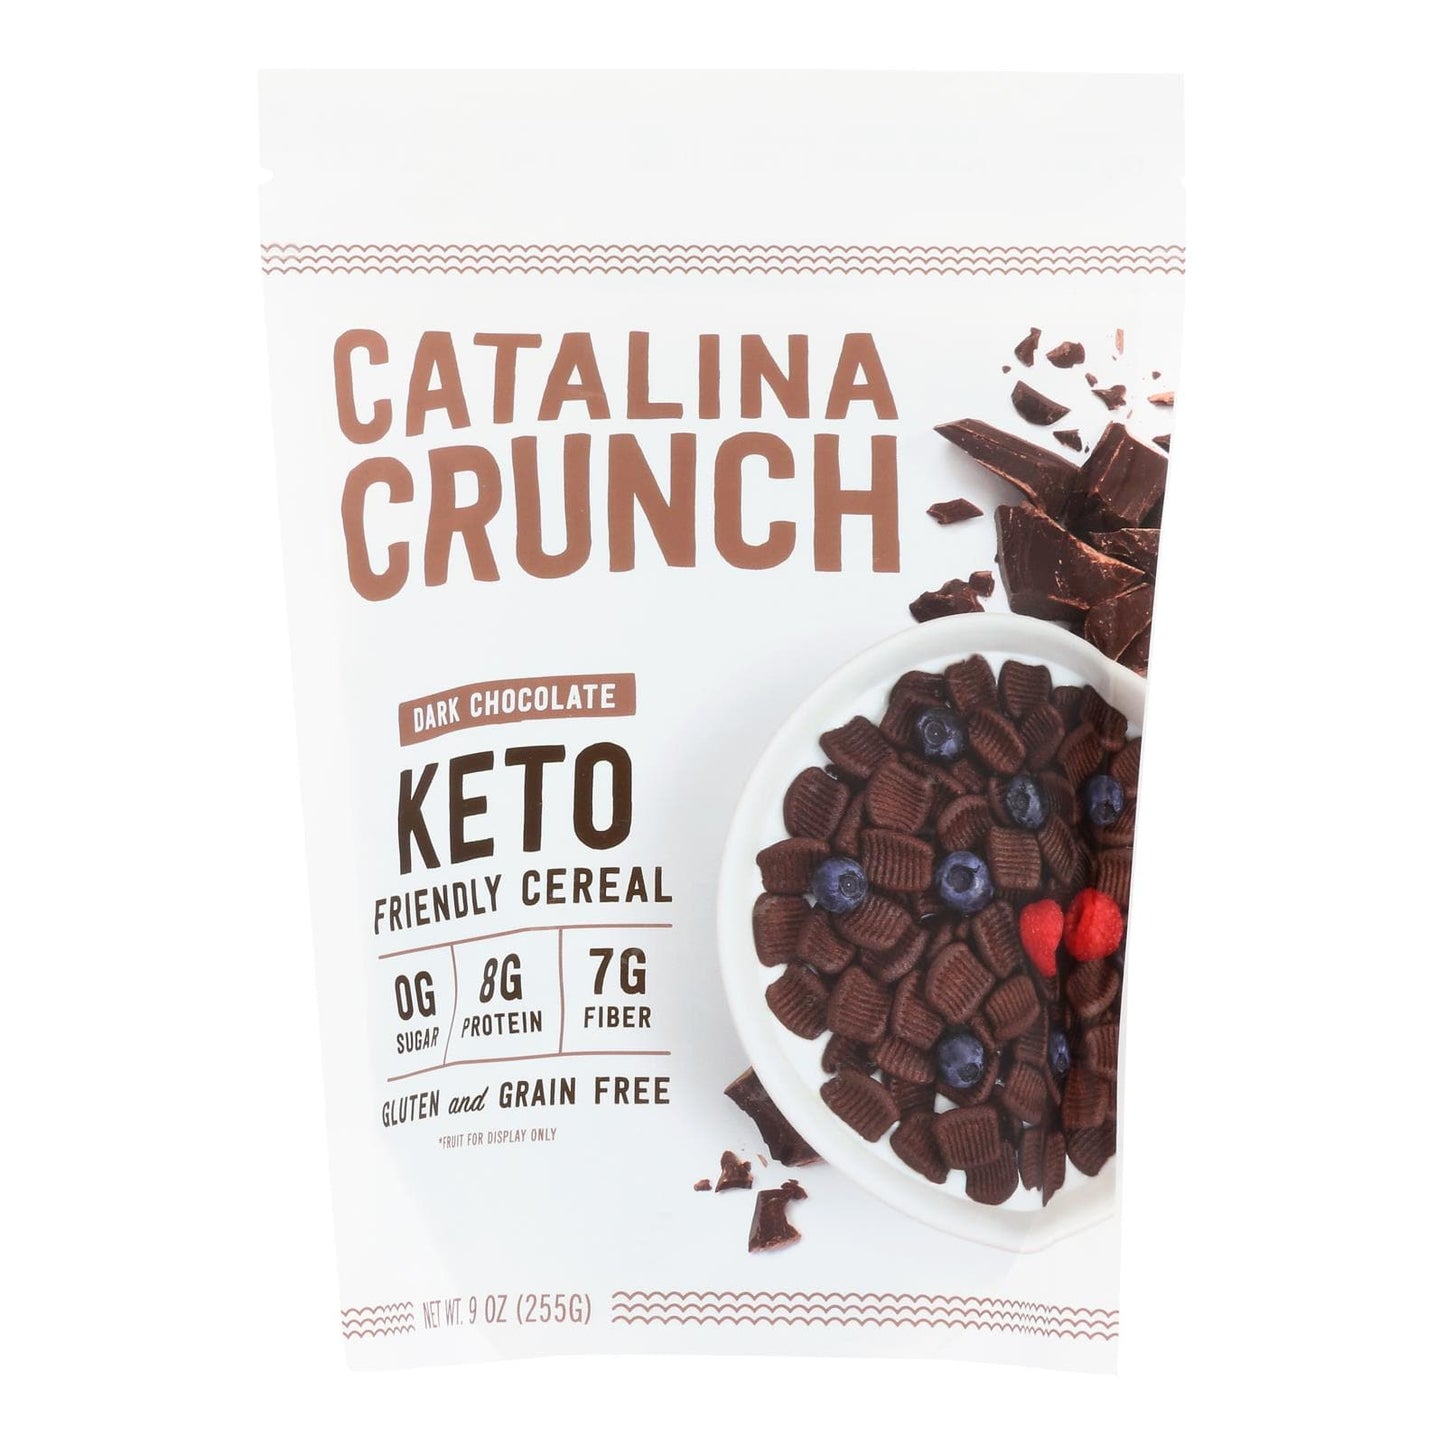 Catalina Crunch - Keto Friendly Cereal Dark Chocolate, 9 oz - Pack of 6